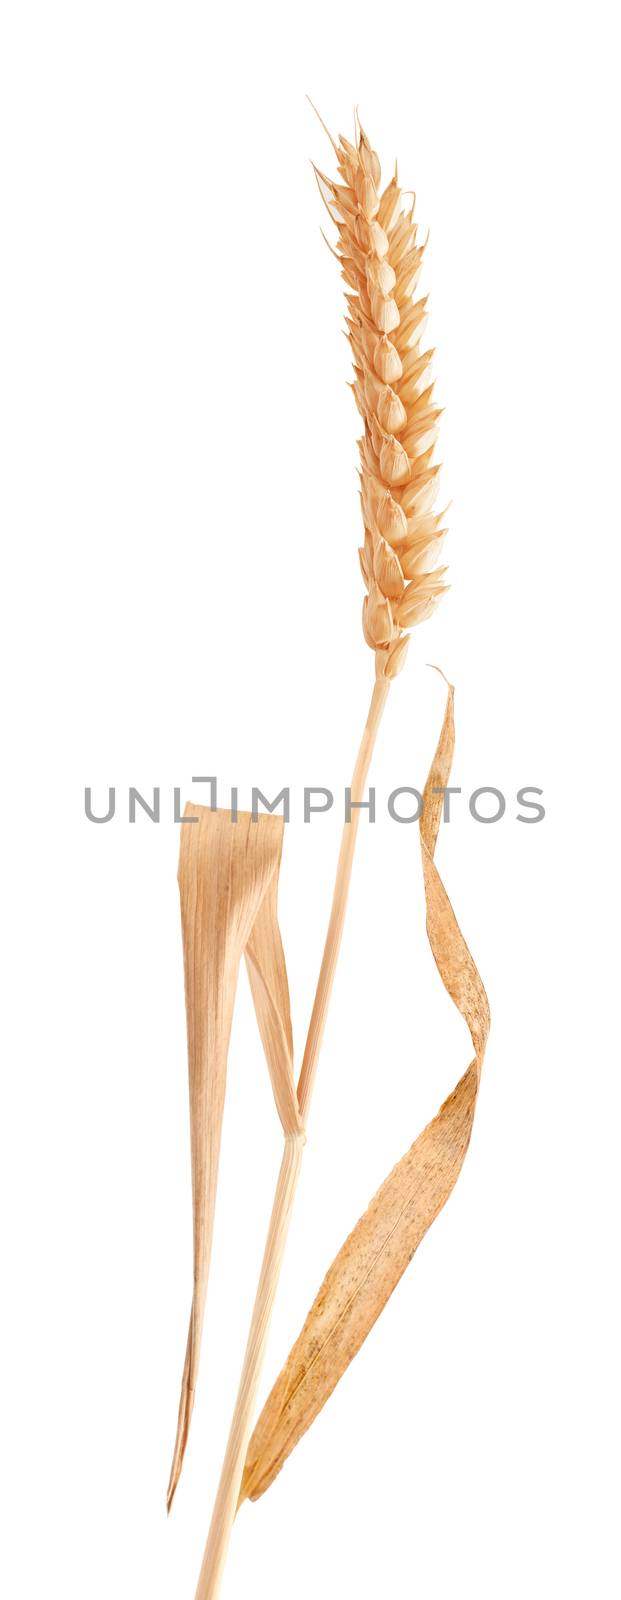 Spikelet of wheat by Angorius